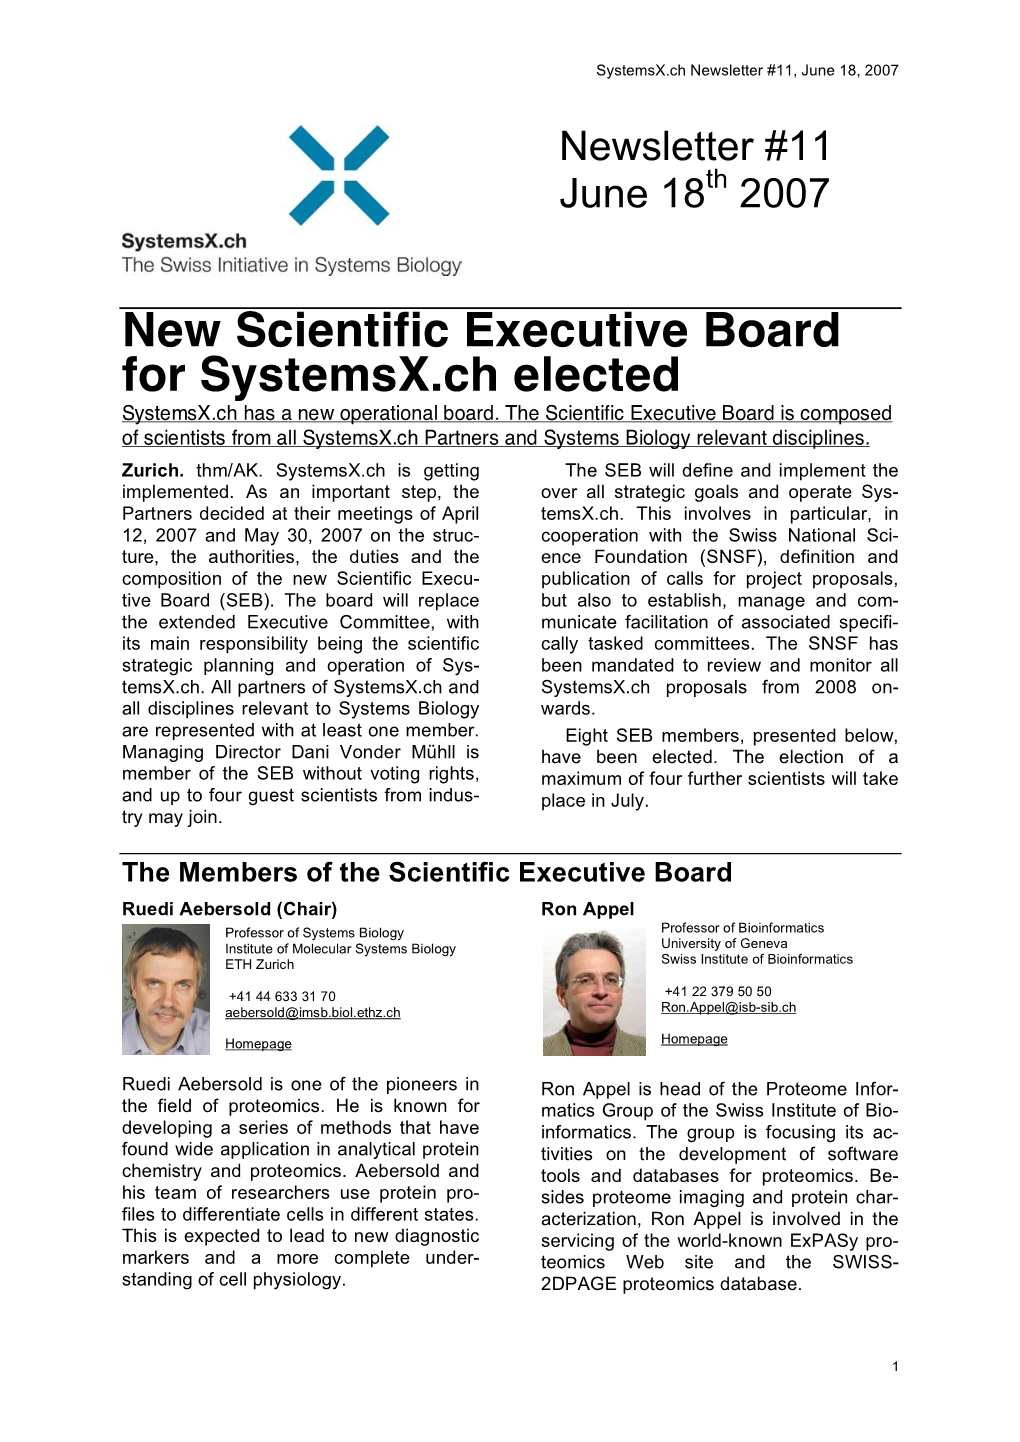 New Scientific Executive Board for Systemsx.Ch Elected Systemsx.Ch Has a New Operational Board